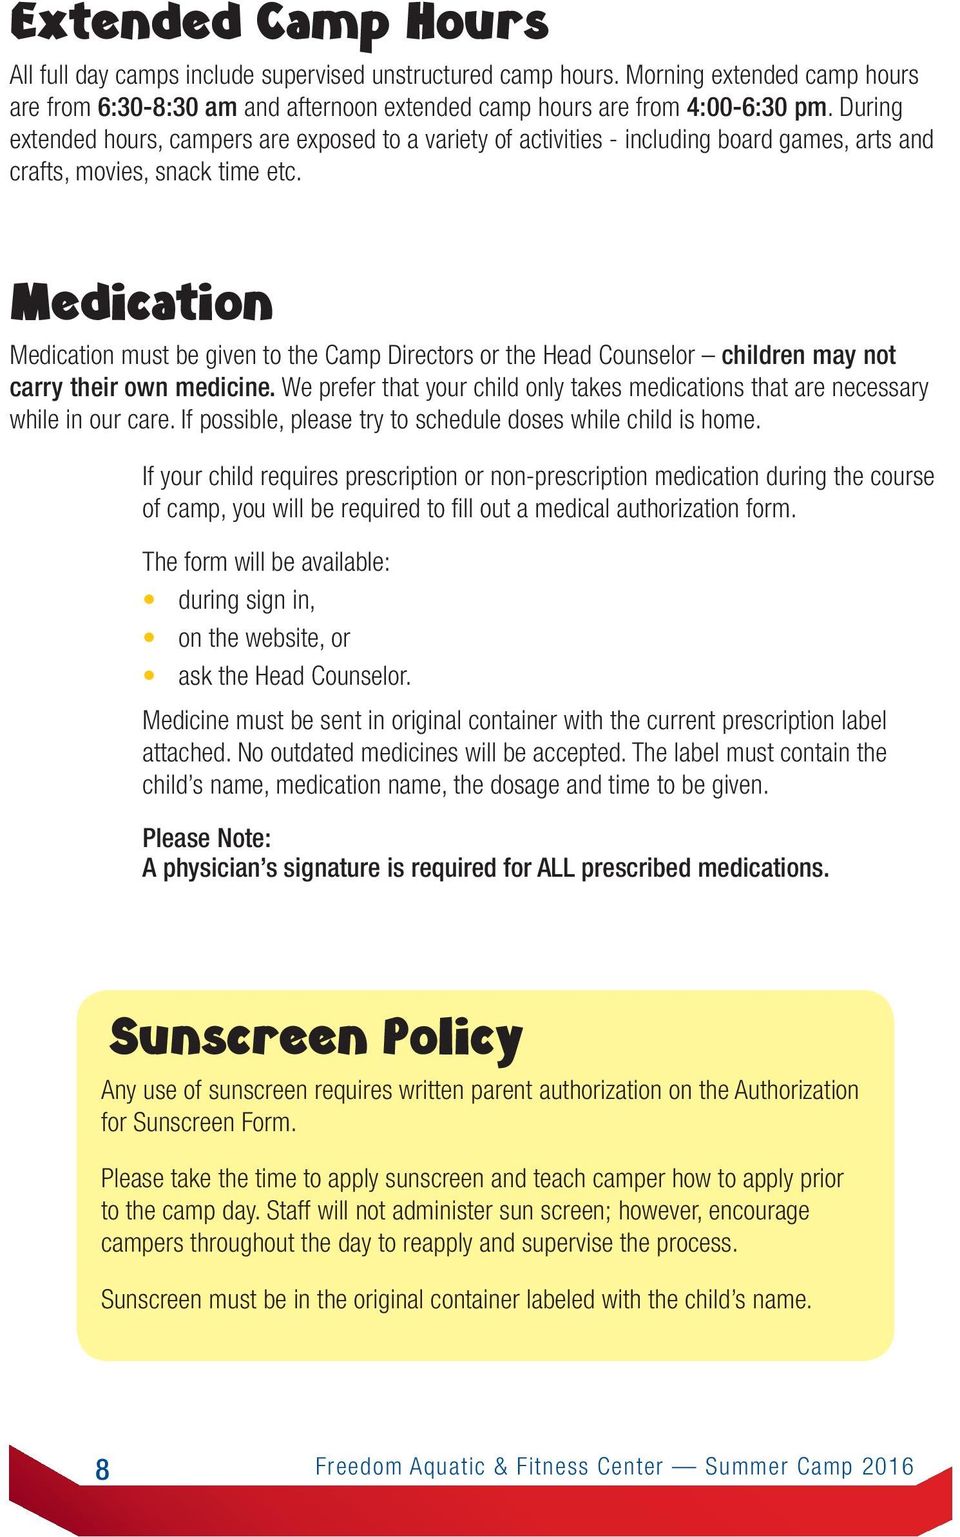 Medication Medication must be given to the Camp Directors or the Head Counselor children may not carry their own medicine.